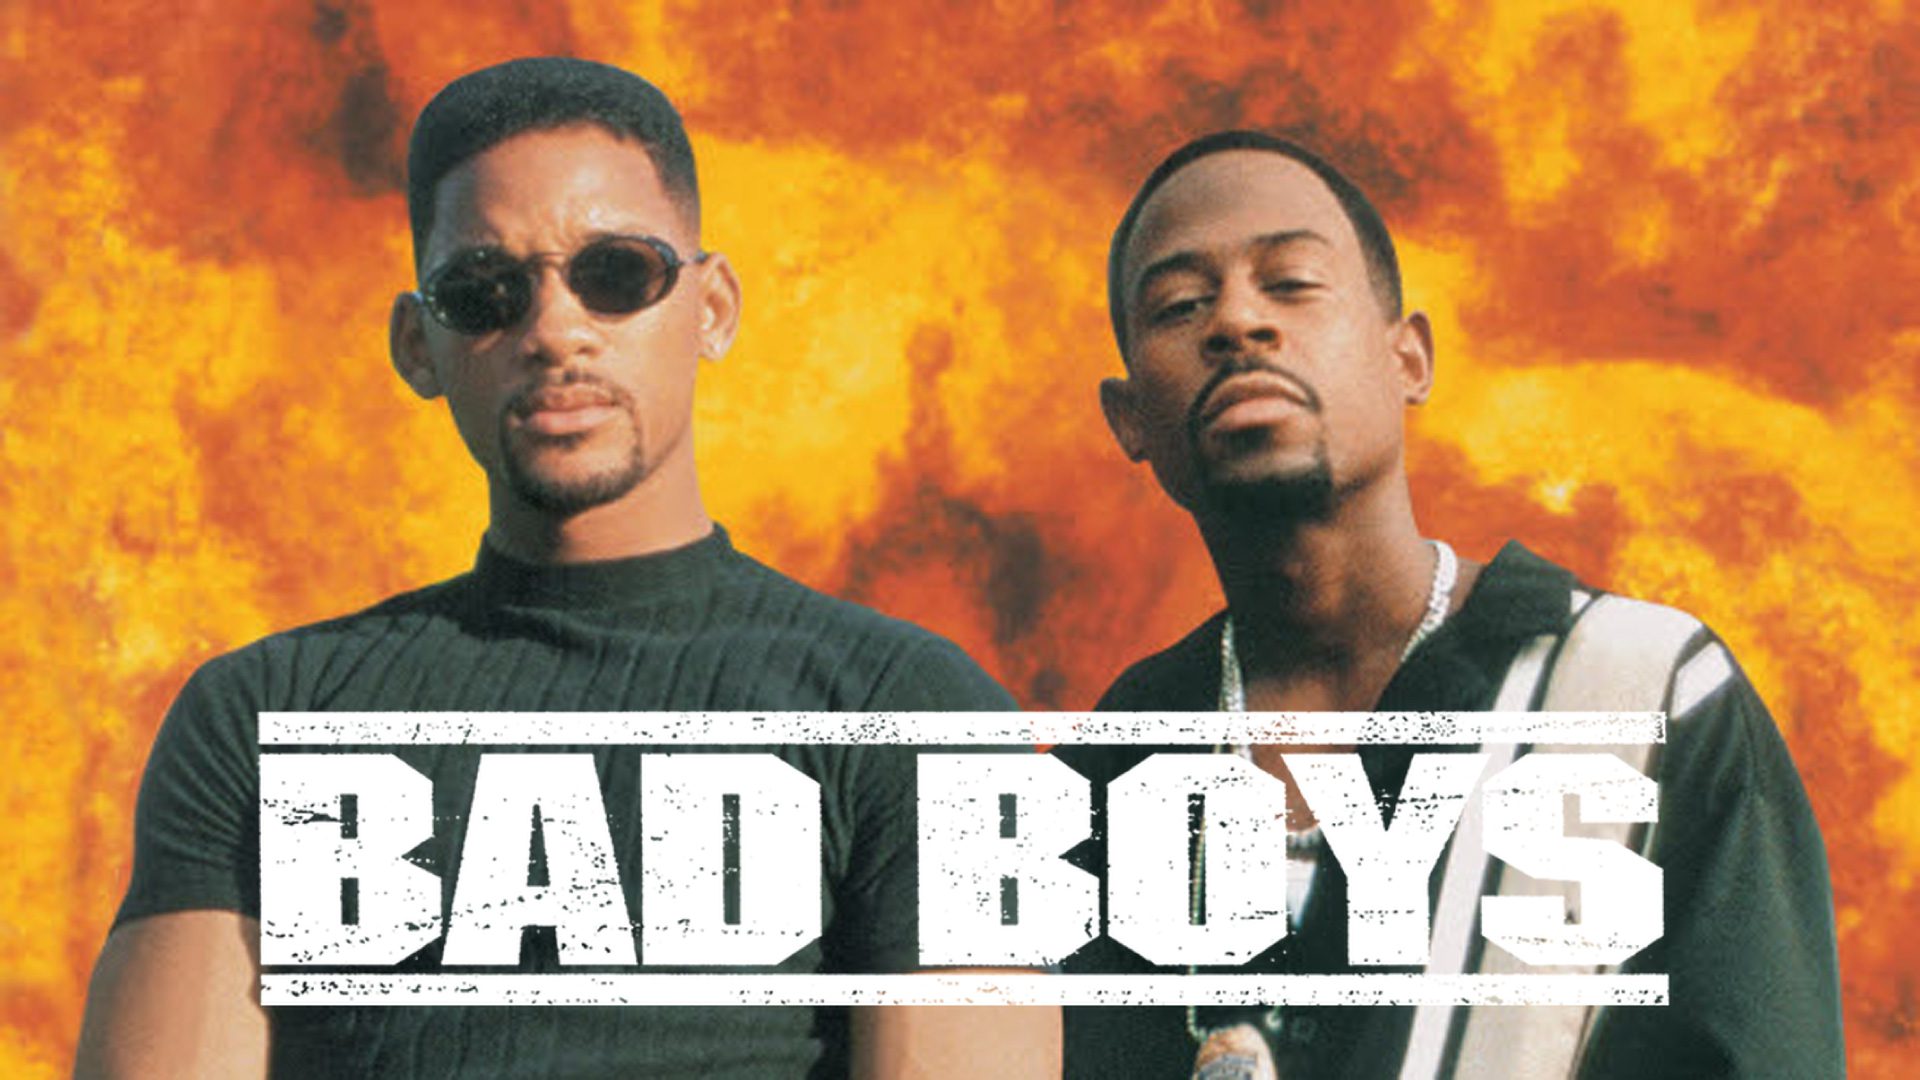 Motorworks Brewing presents Bad Boys Movie Cover with Will Smith and Martin Lawrence in front of fiery explosion